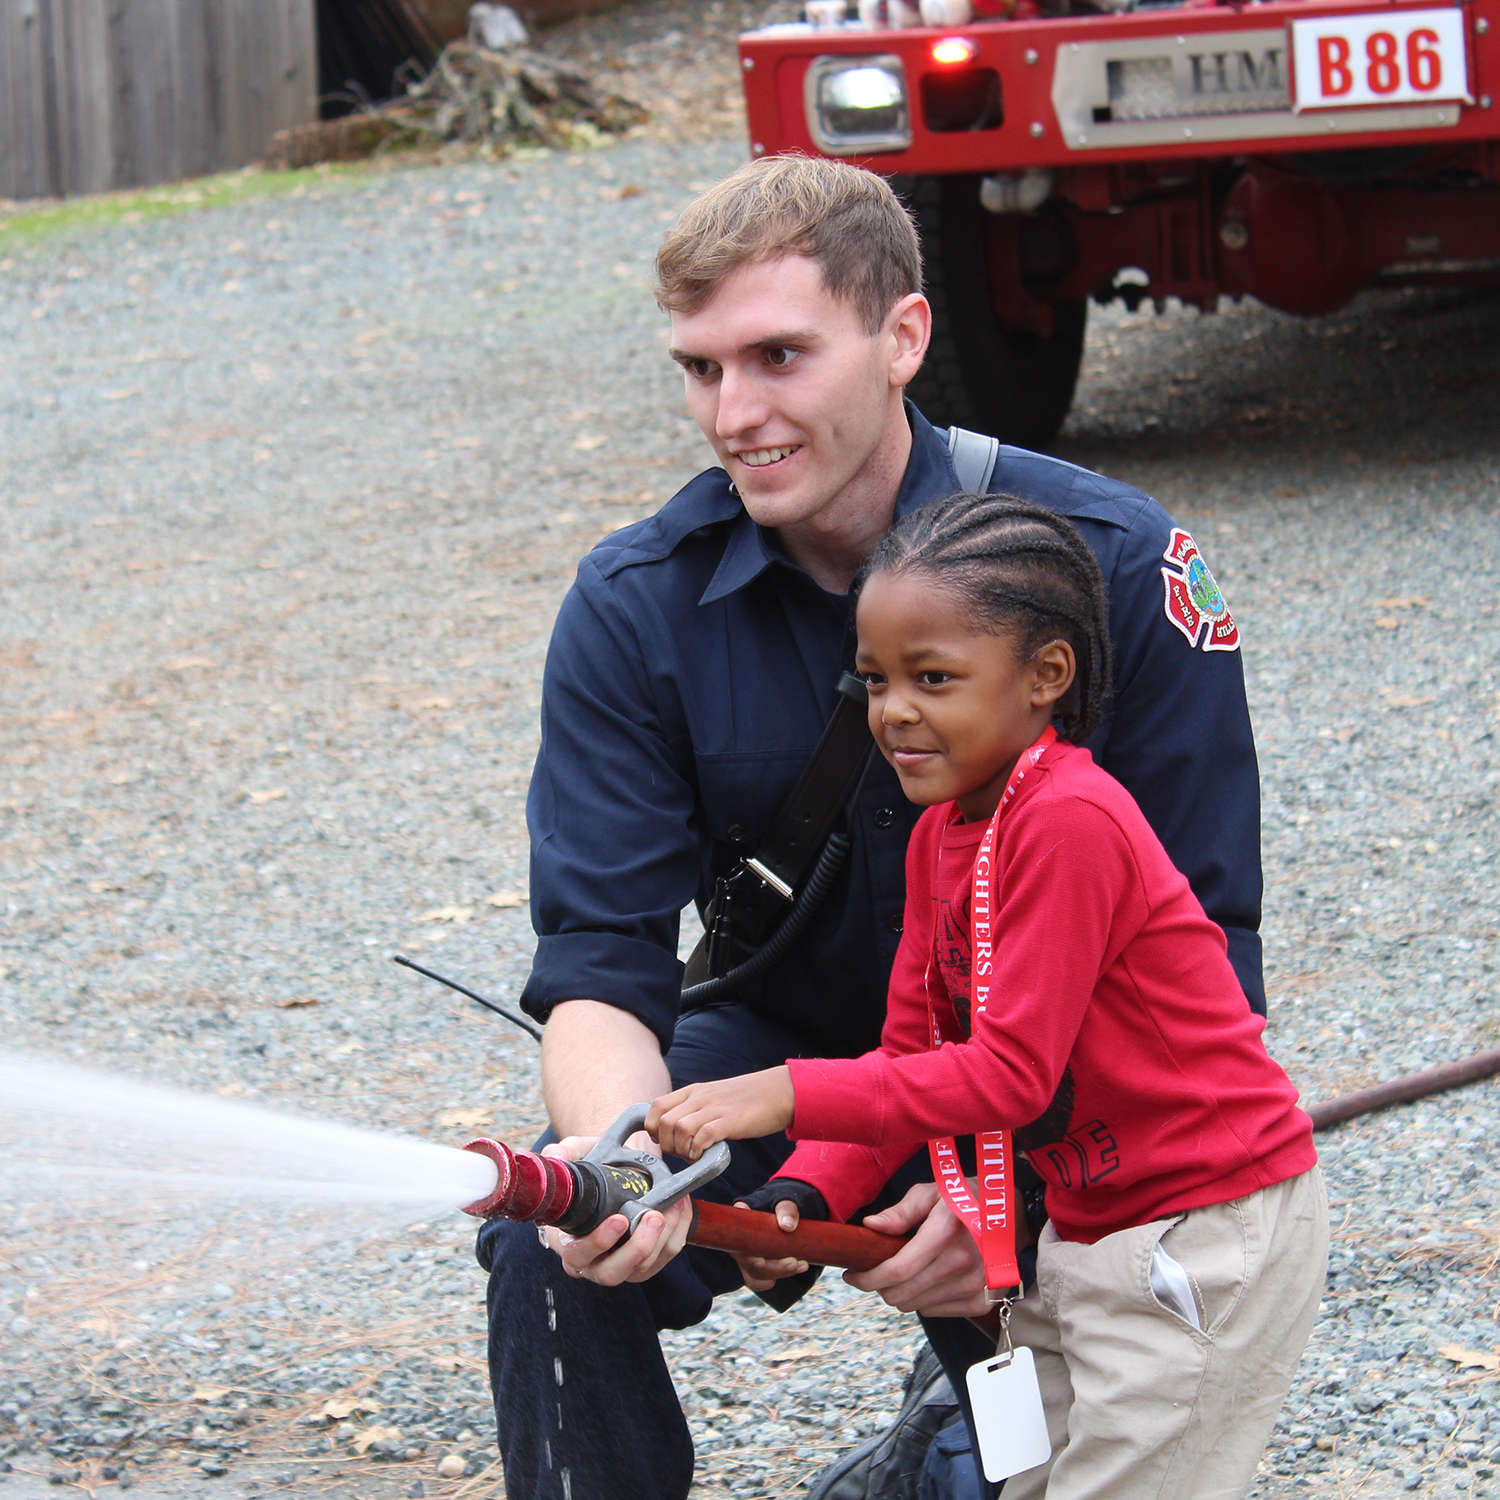 A firefighter helps a young child hold a firehose in front of a fire truck